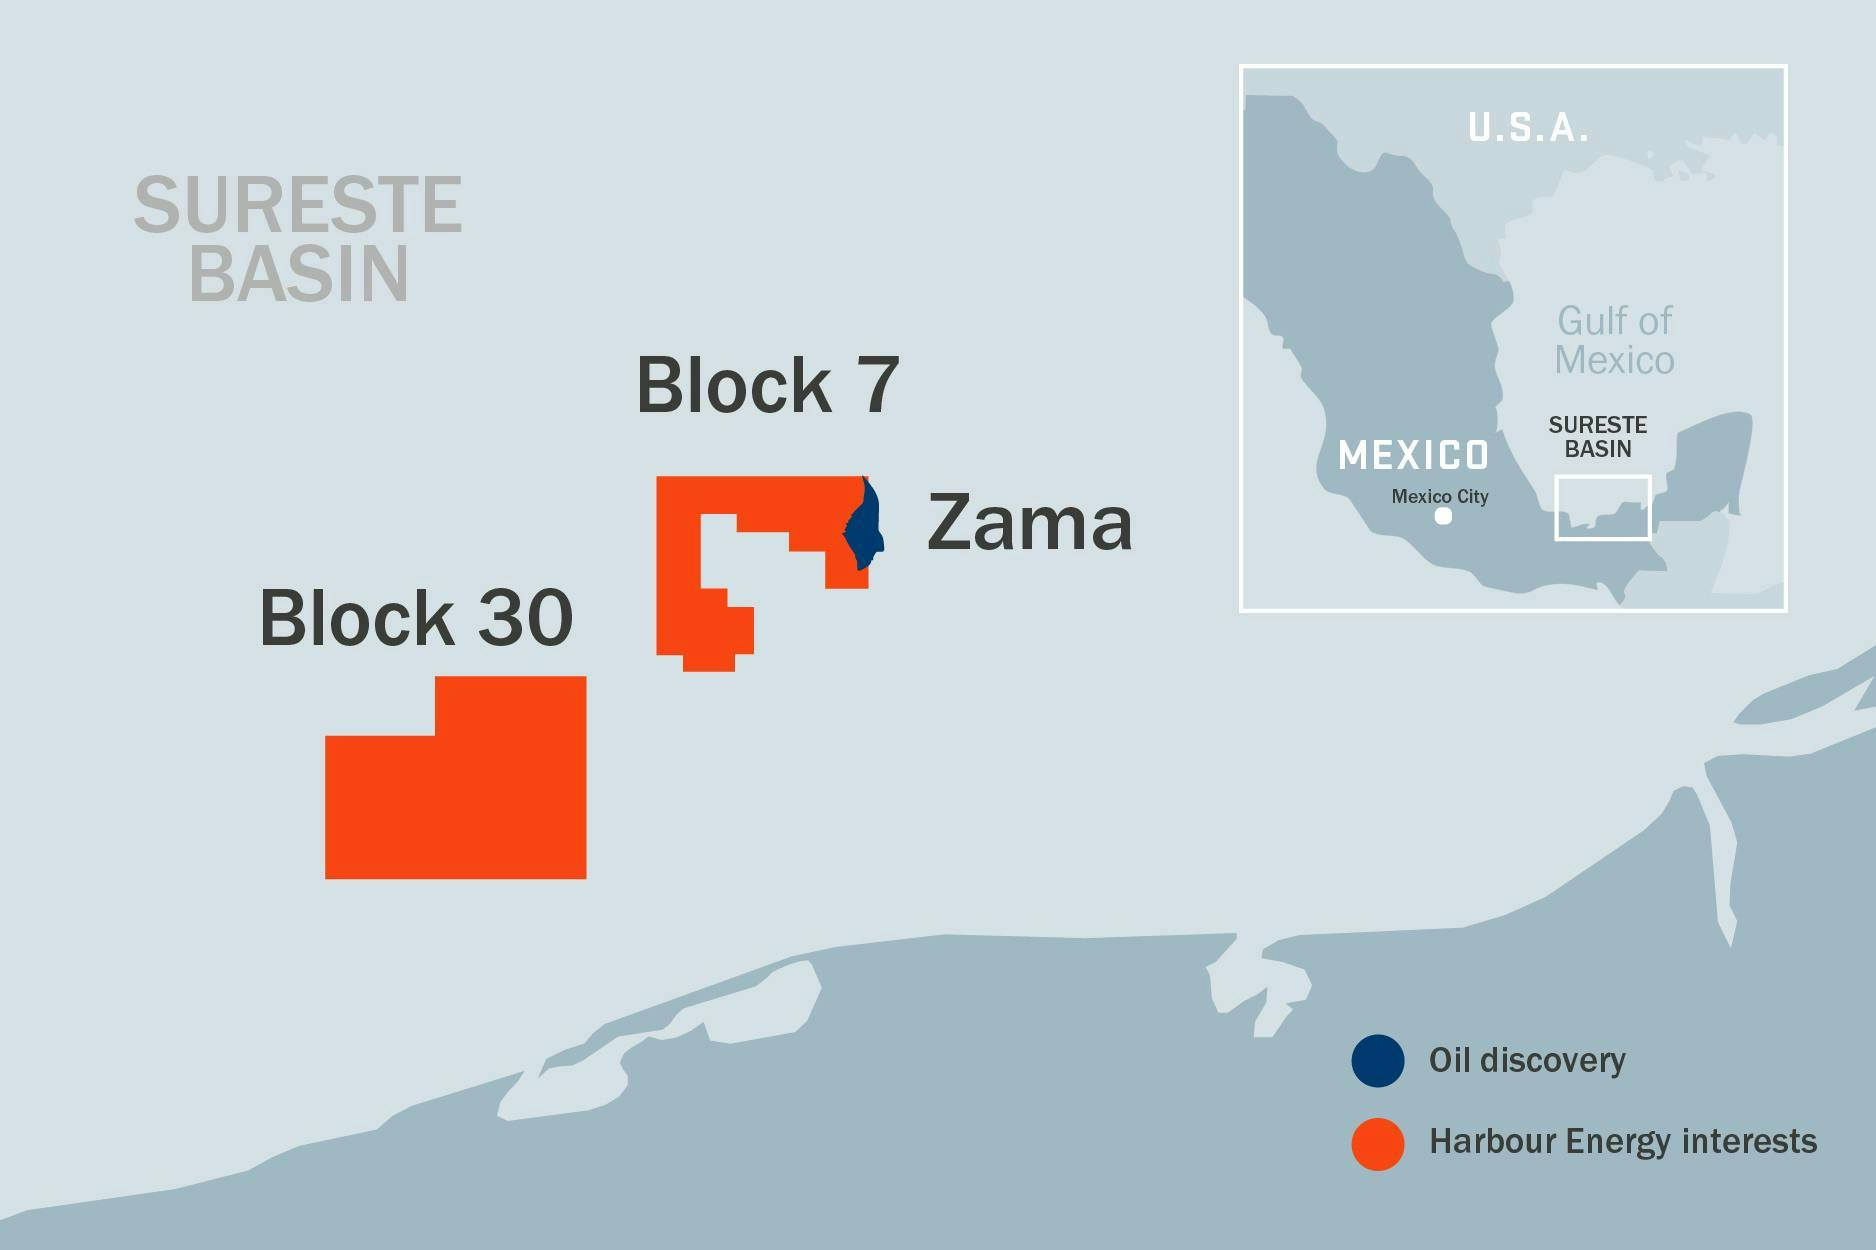 The Zama unit development plan was submitted in March 2023 and approved by the regulator in June. The Zama unit on Block 7 is in the shallow water Sureste Basin in the Gulf of Mexico.